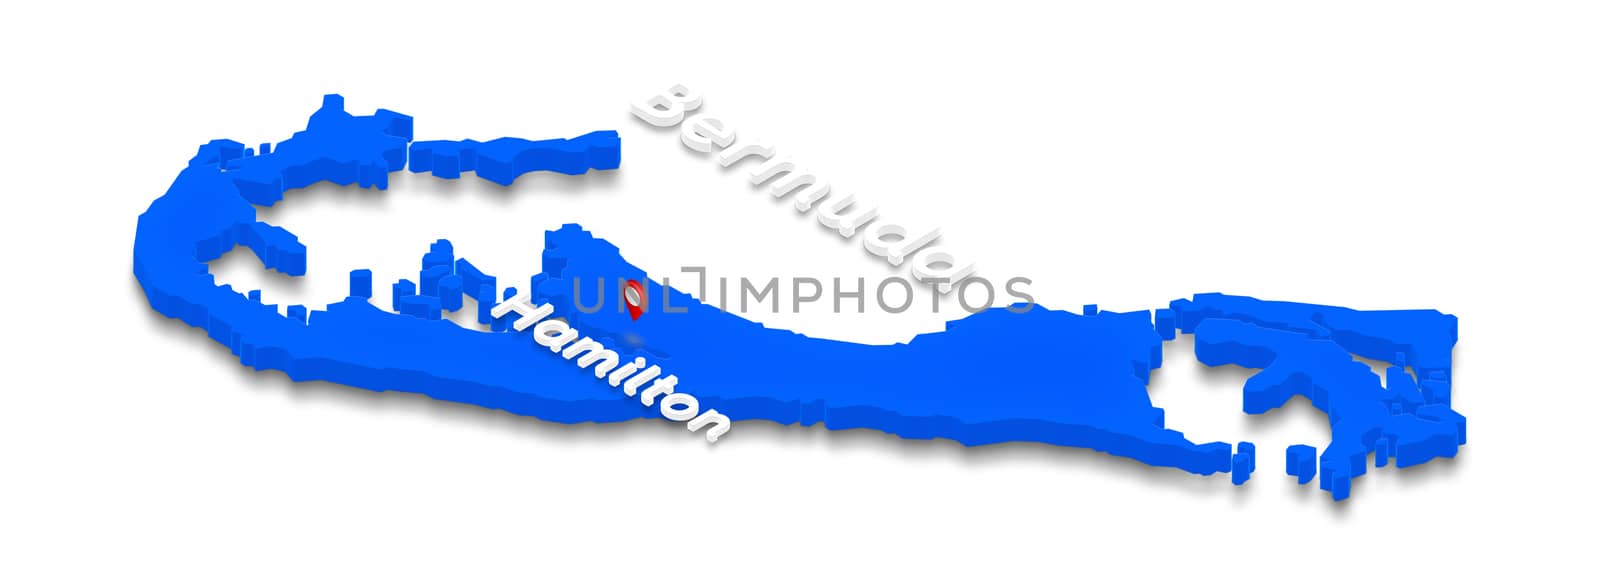 Illustration of a blue ground map of Bermuda on white isolated background. Left 3D isometric perspective projection with the name of country and capital Hamilton.